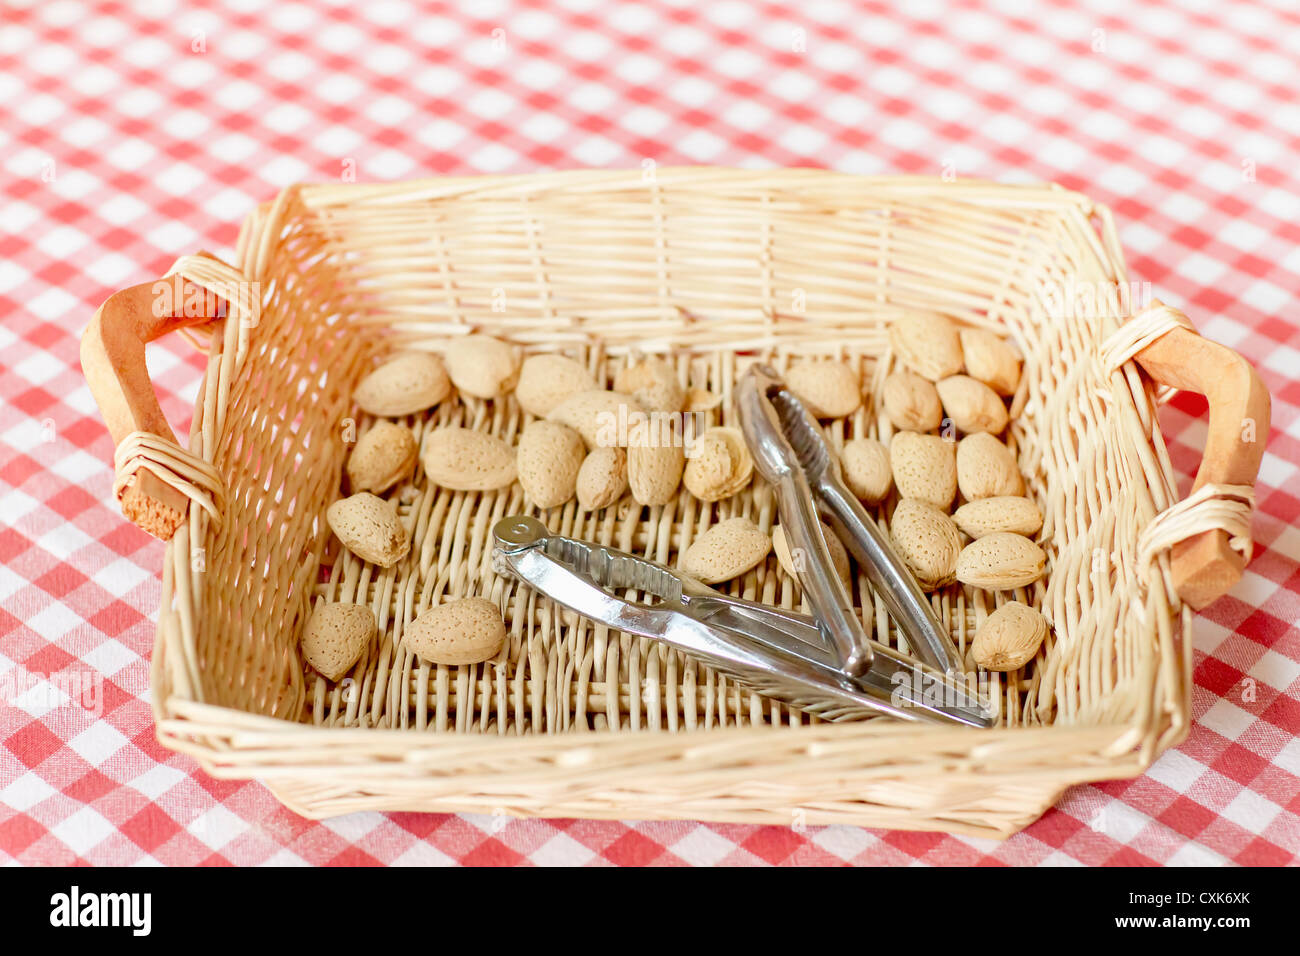 Almonds and nutcrackers in a basket. Stock Photo